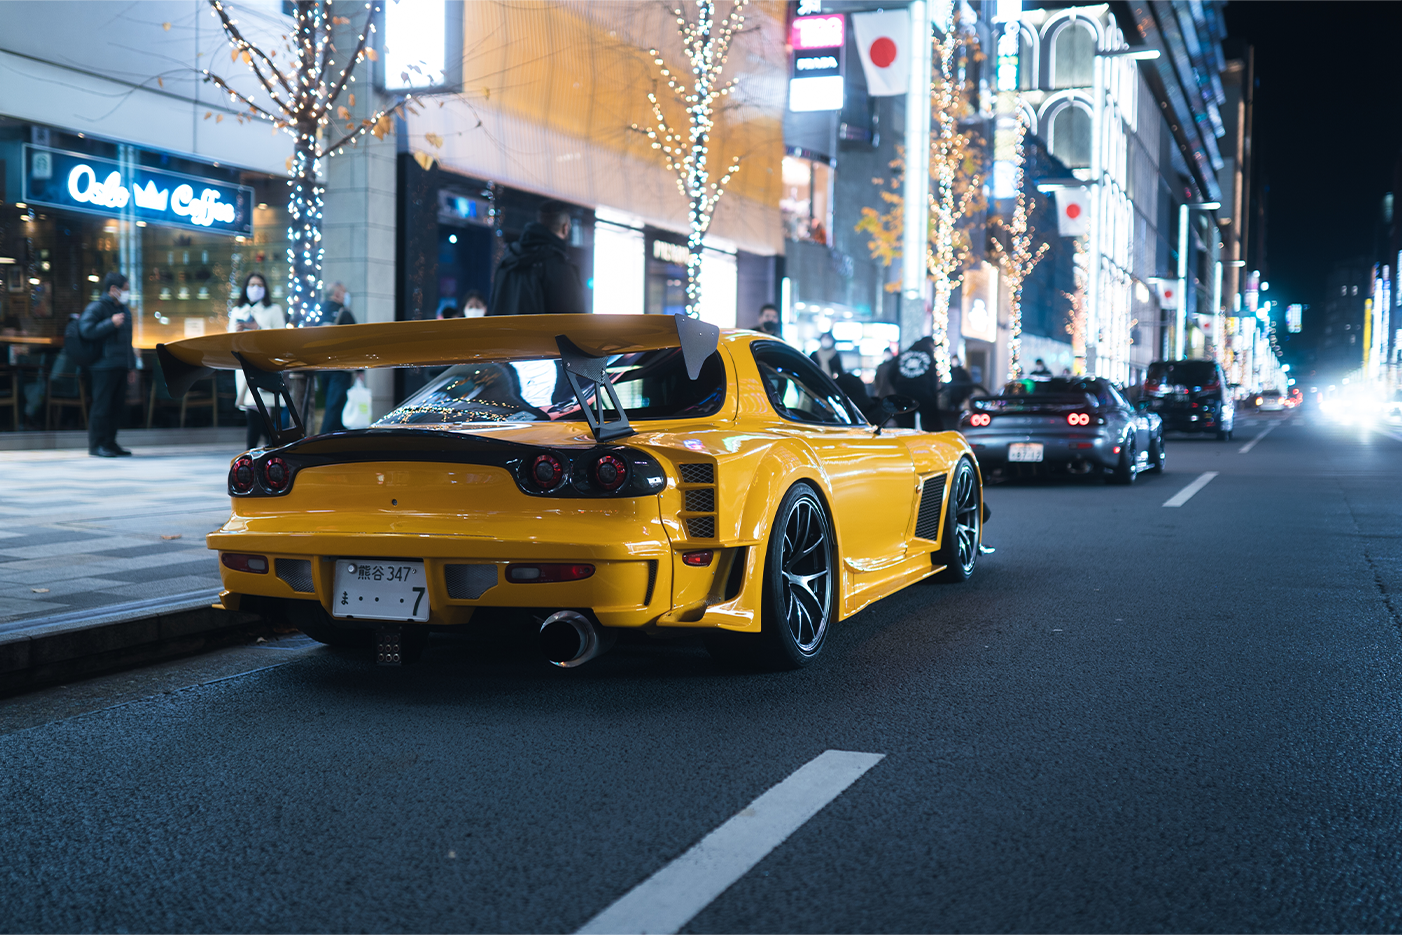 FD RX7 in Ginza, Tokyo